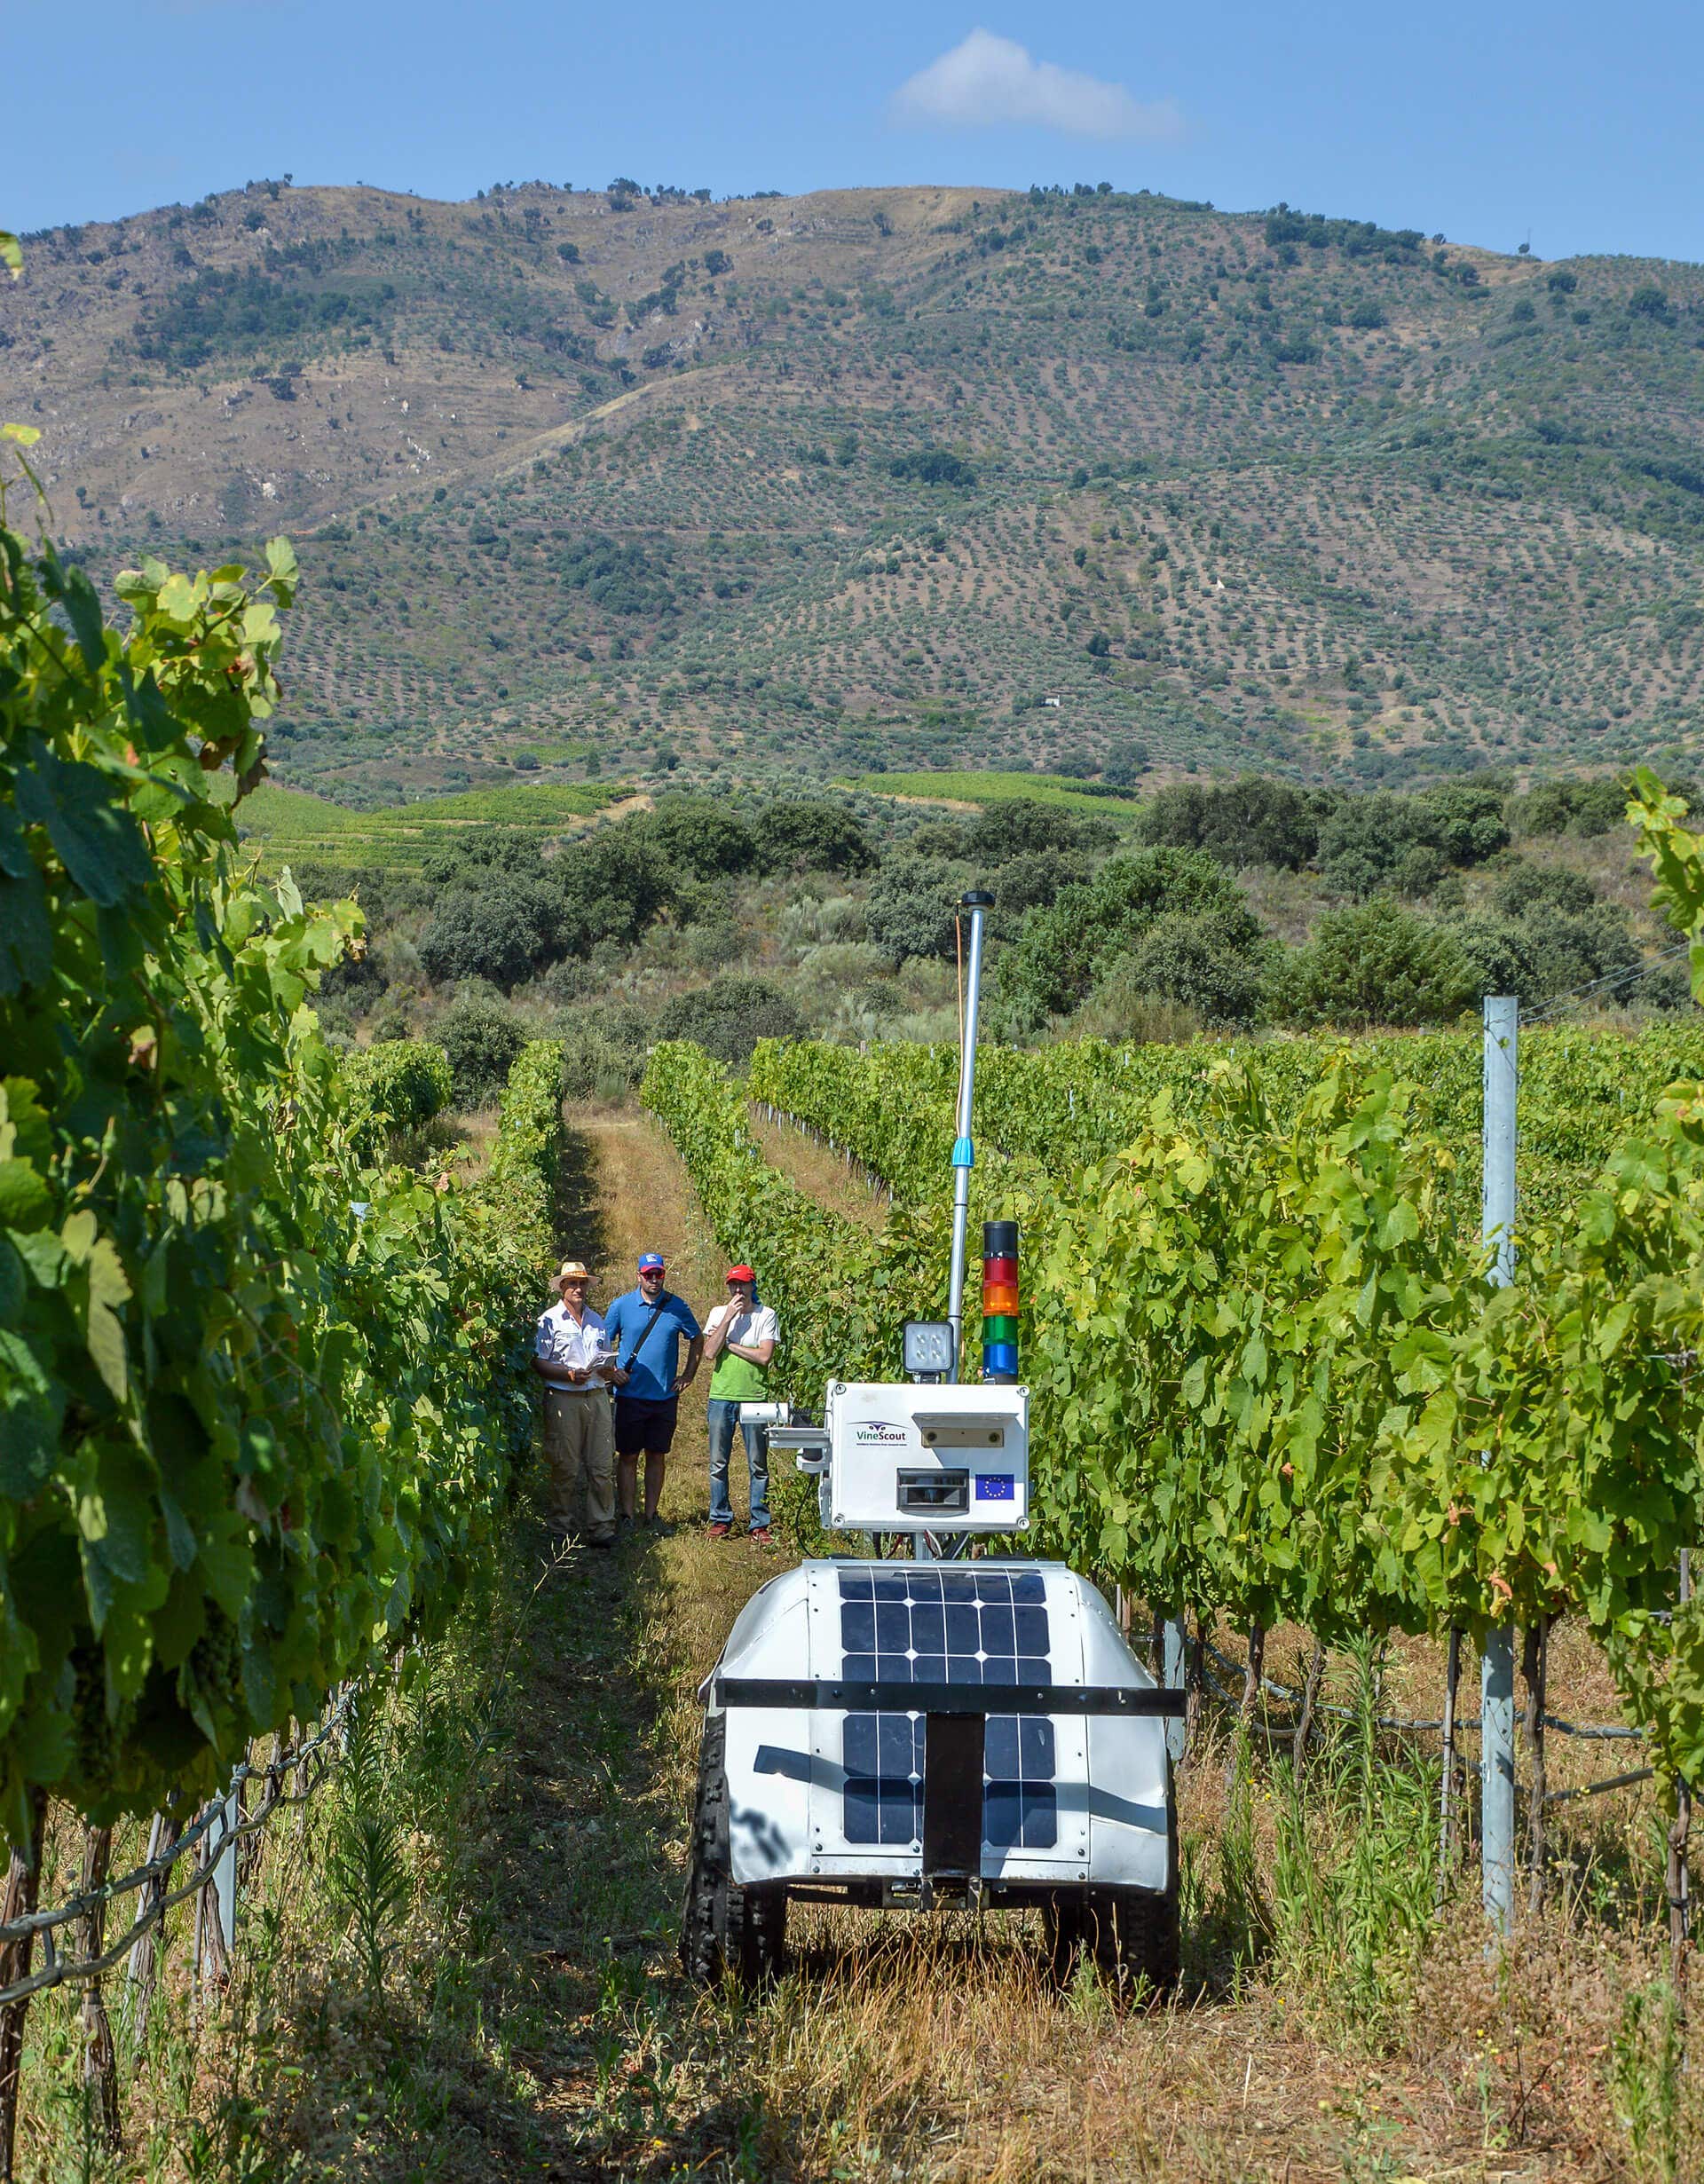 Vertical image of robot in between two vineyard rows, mountains in background